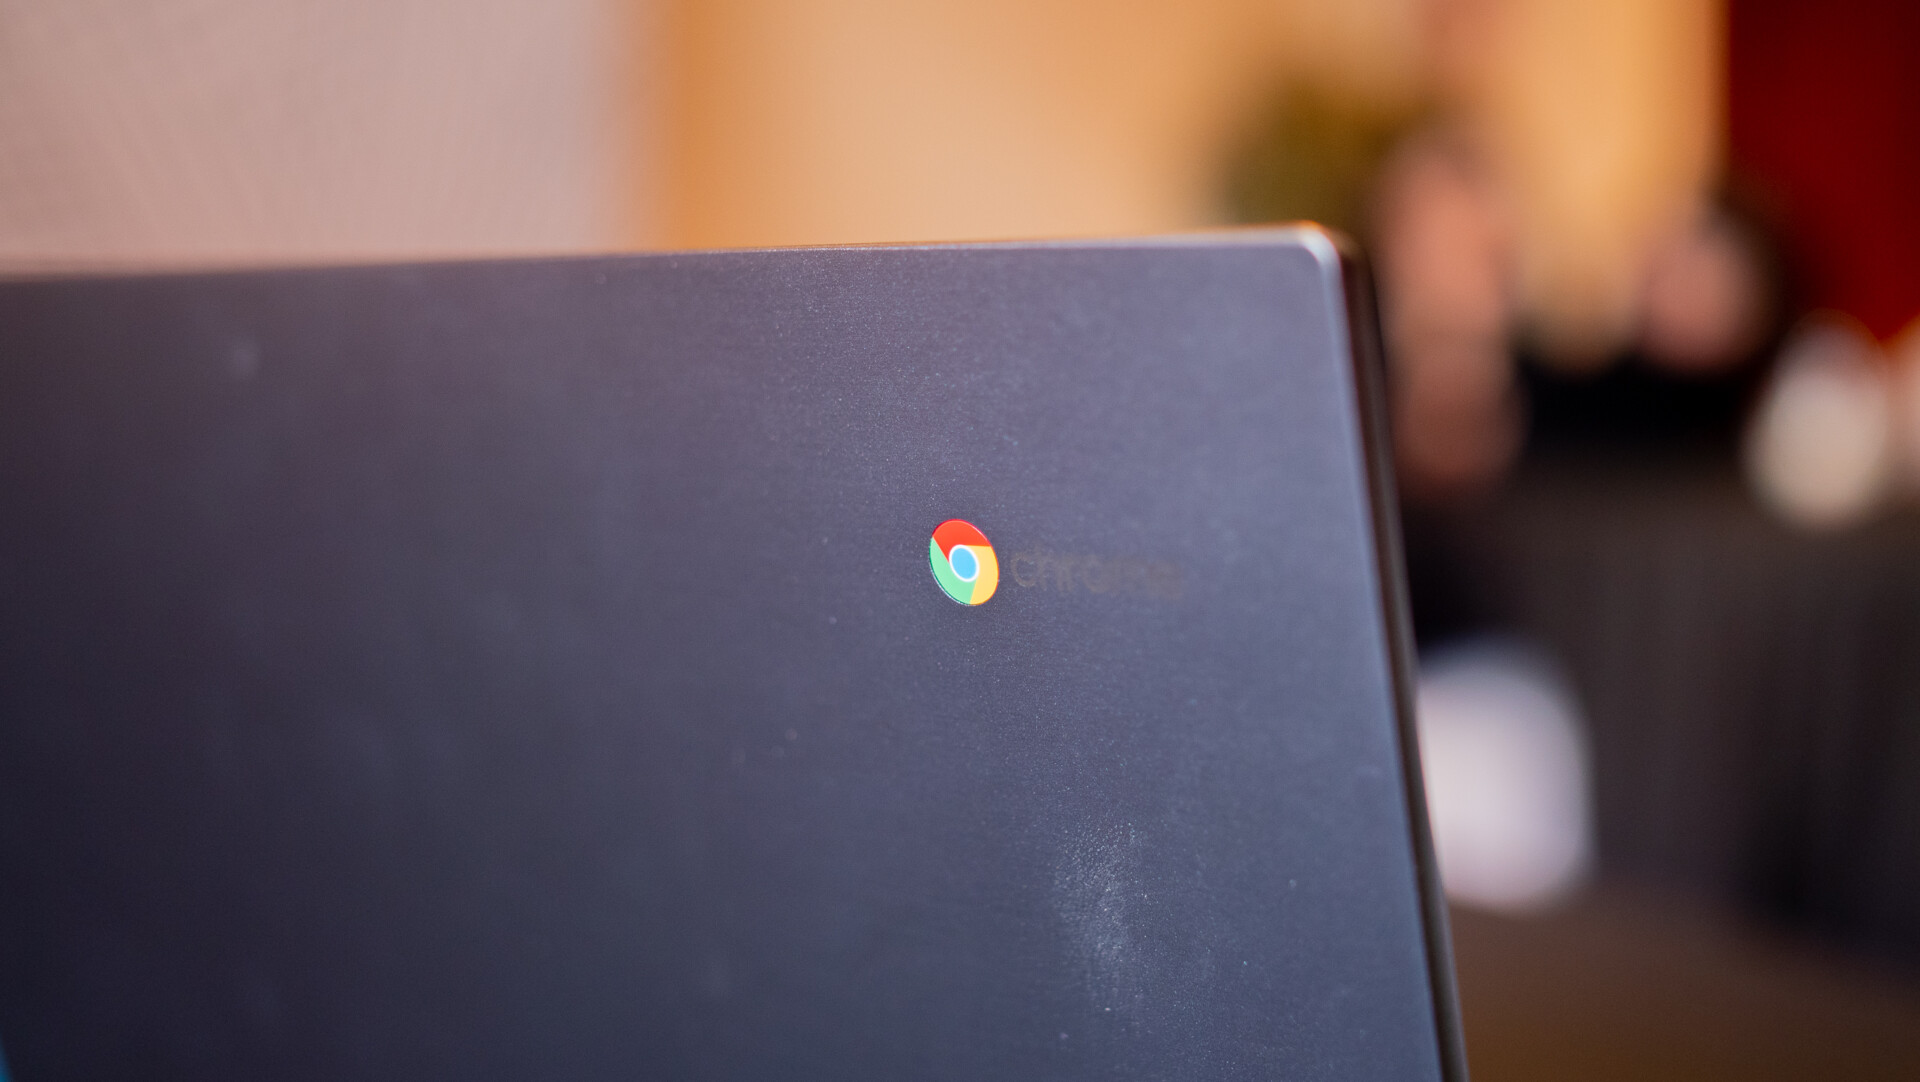 The Chrome logo on the back of the Chromebook.